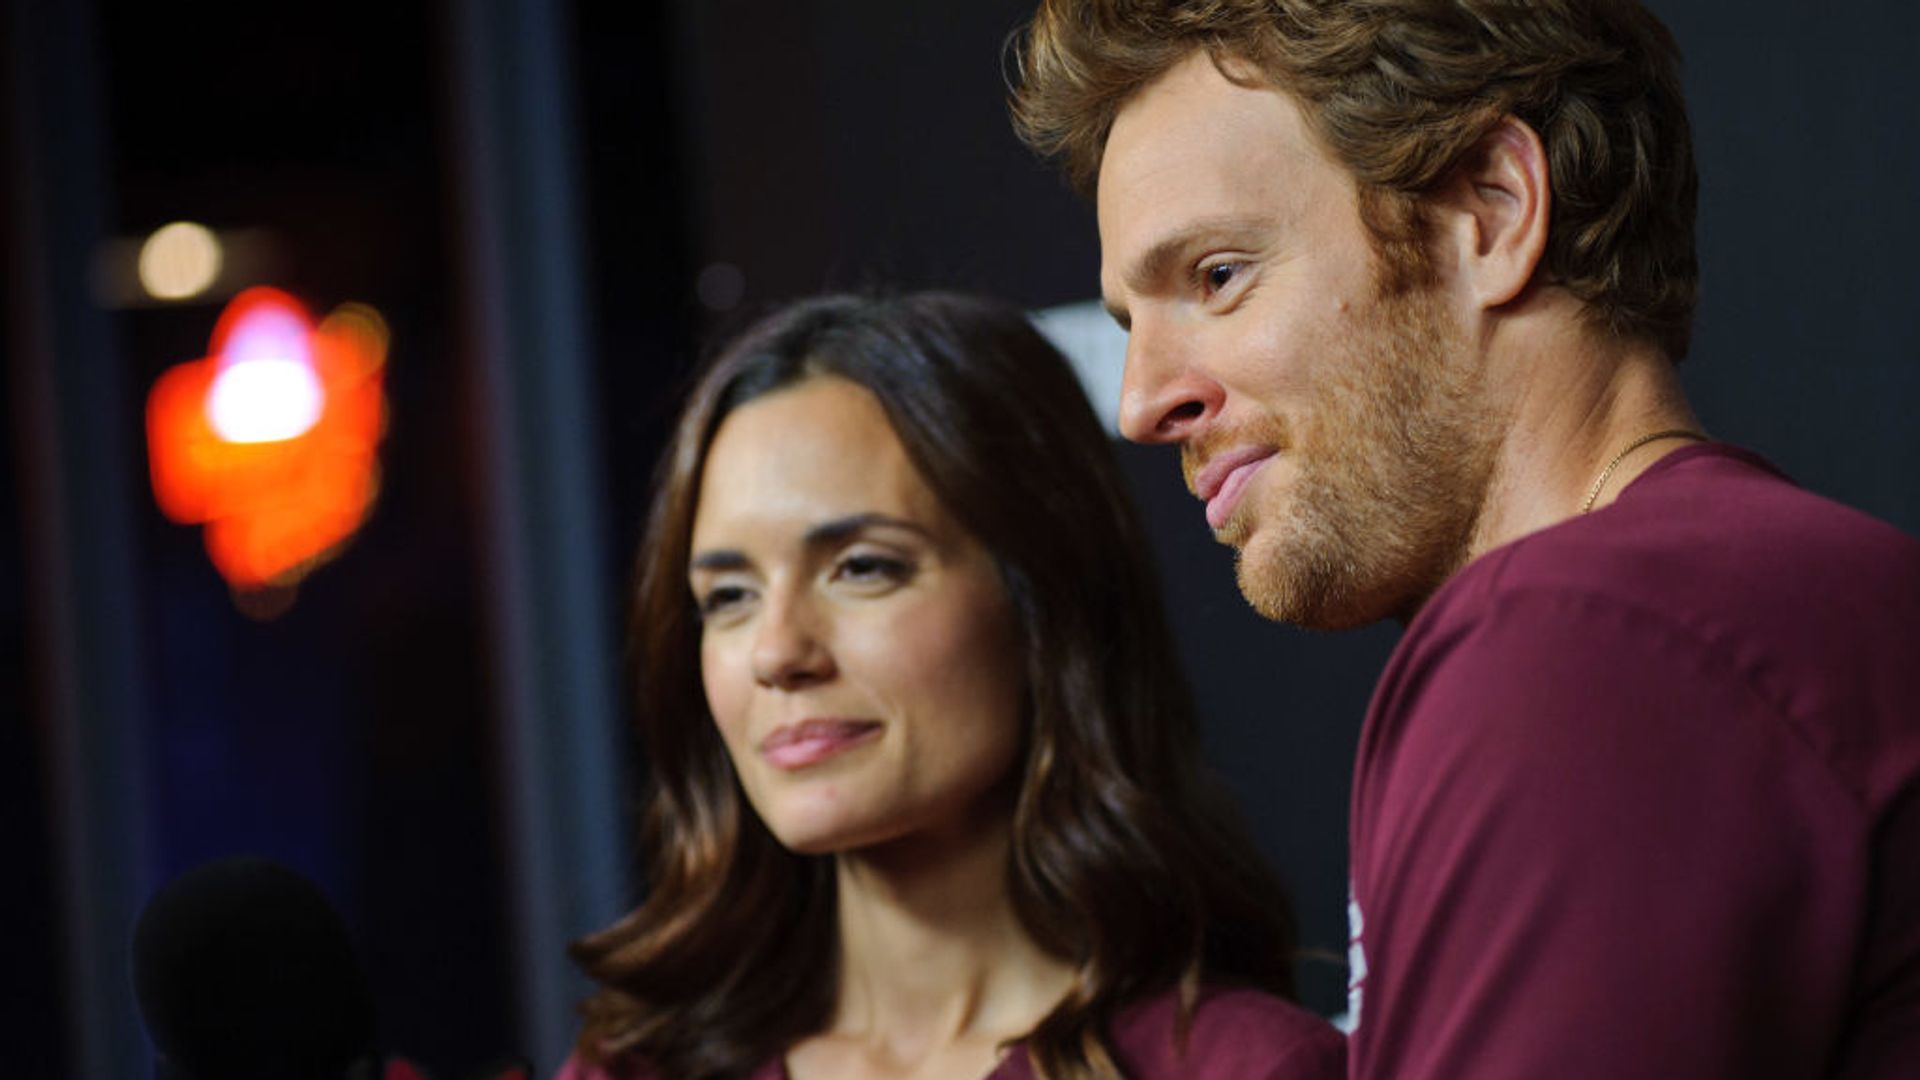 Torrey DeVitto and Nick Gehlfuss attend the 2018 press day for "Chicago Fire", "Chicago PD", and "Chicago Med" on September 10, 2018 in Chicago, Illinois.  